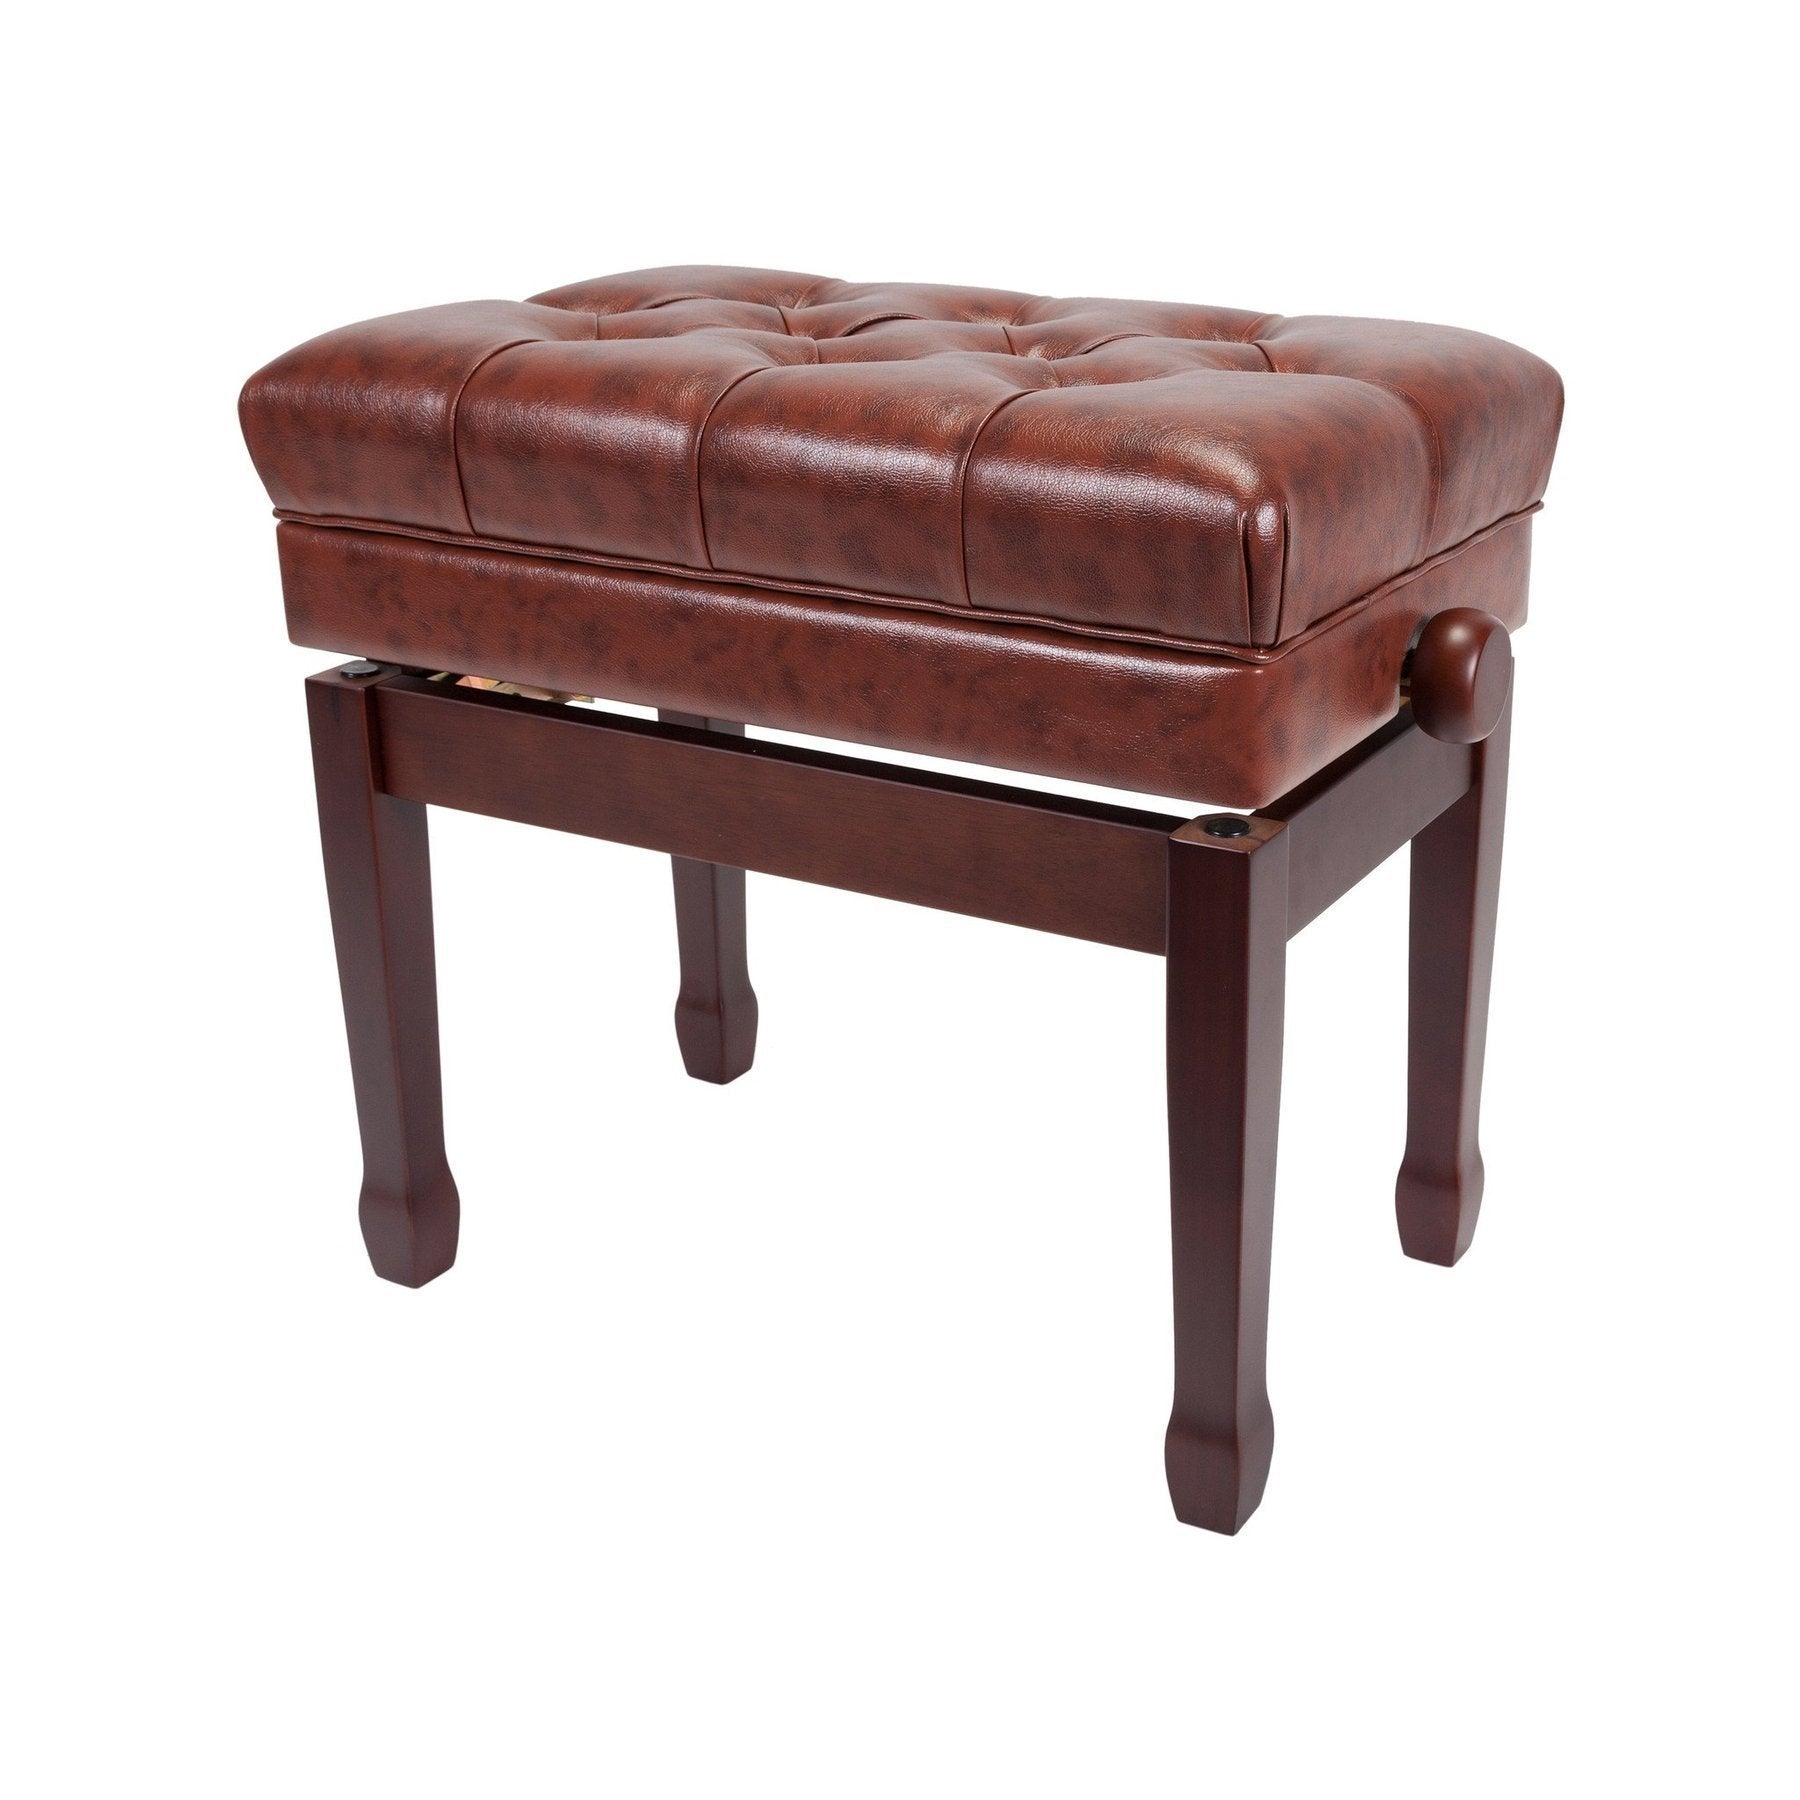 Crown Premium Tufted Double Padded Height Adjustable Piano Stool with Storage Compartment (Walnut)-CPS-7AS-WAL